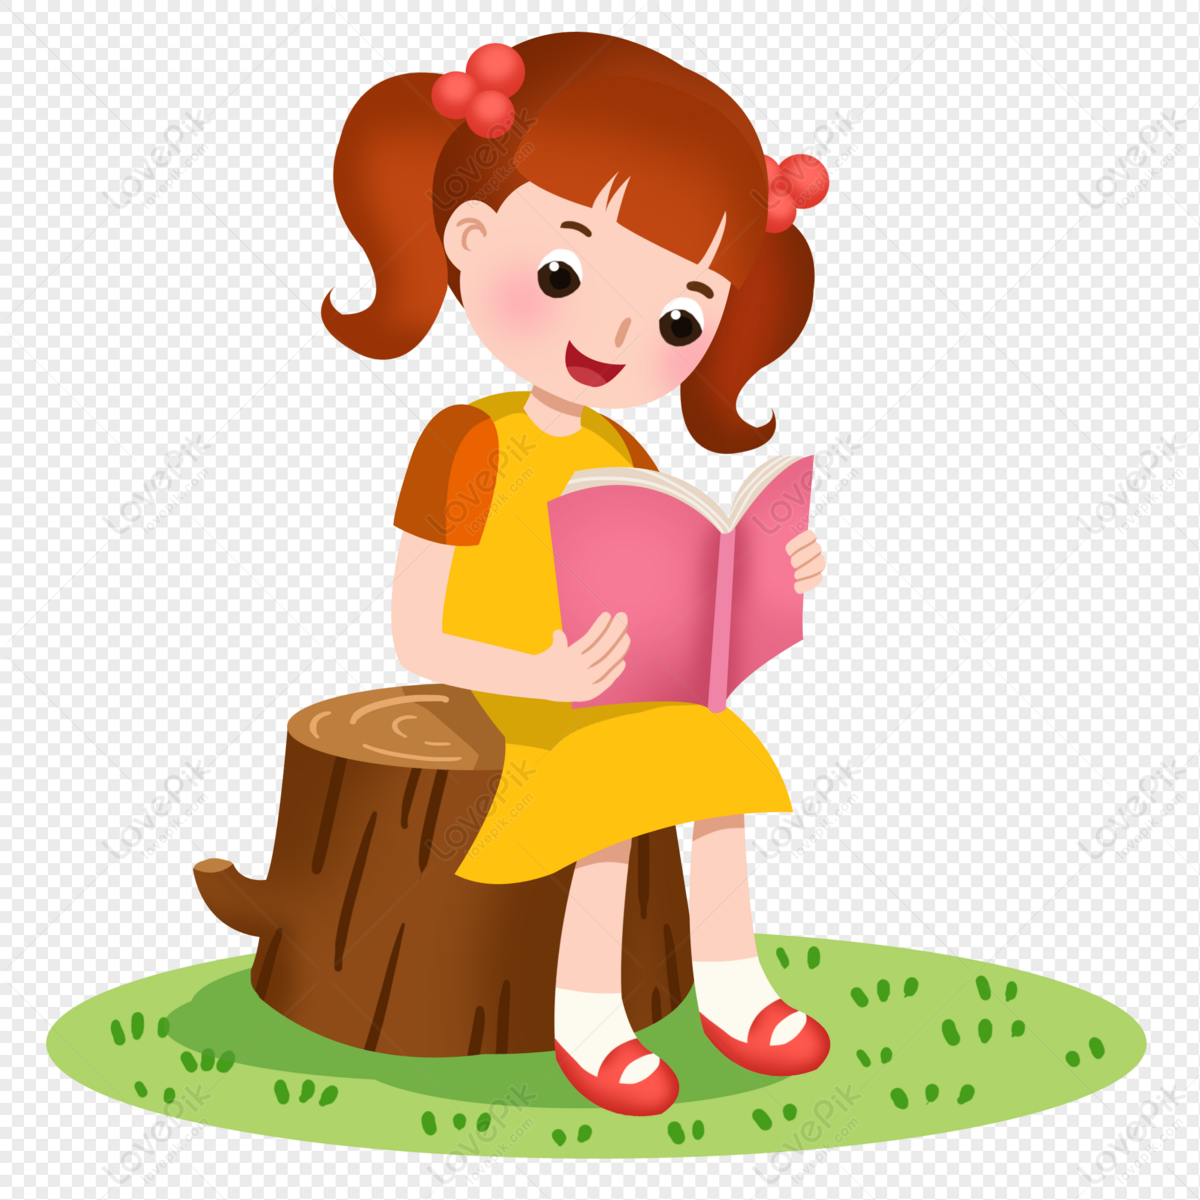 Cartoon Girl Reading Book Illustration PNG Image And Clipart Image For Free  Download - Lovepik | 401272088